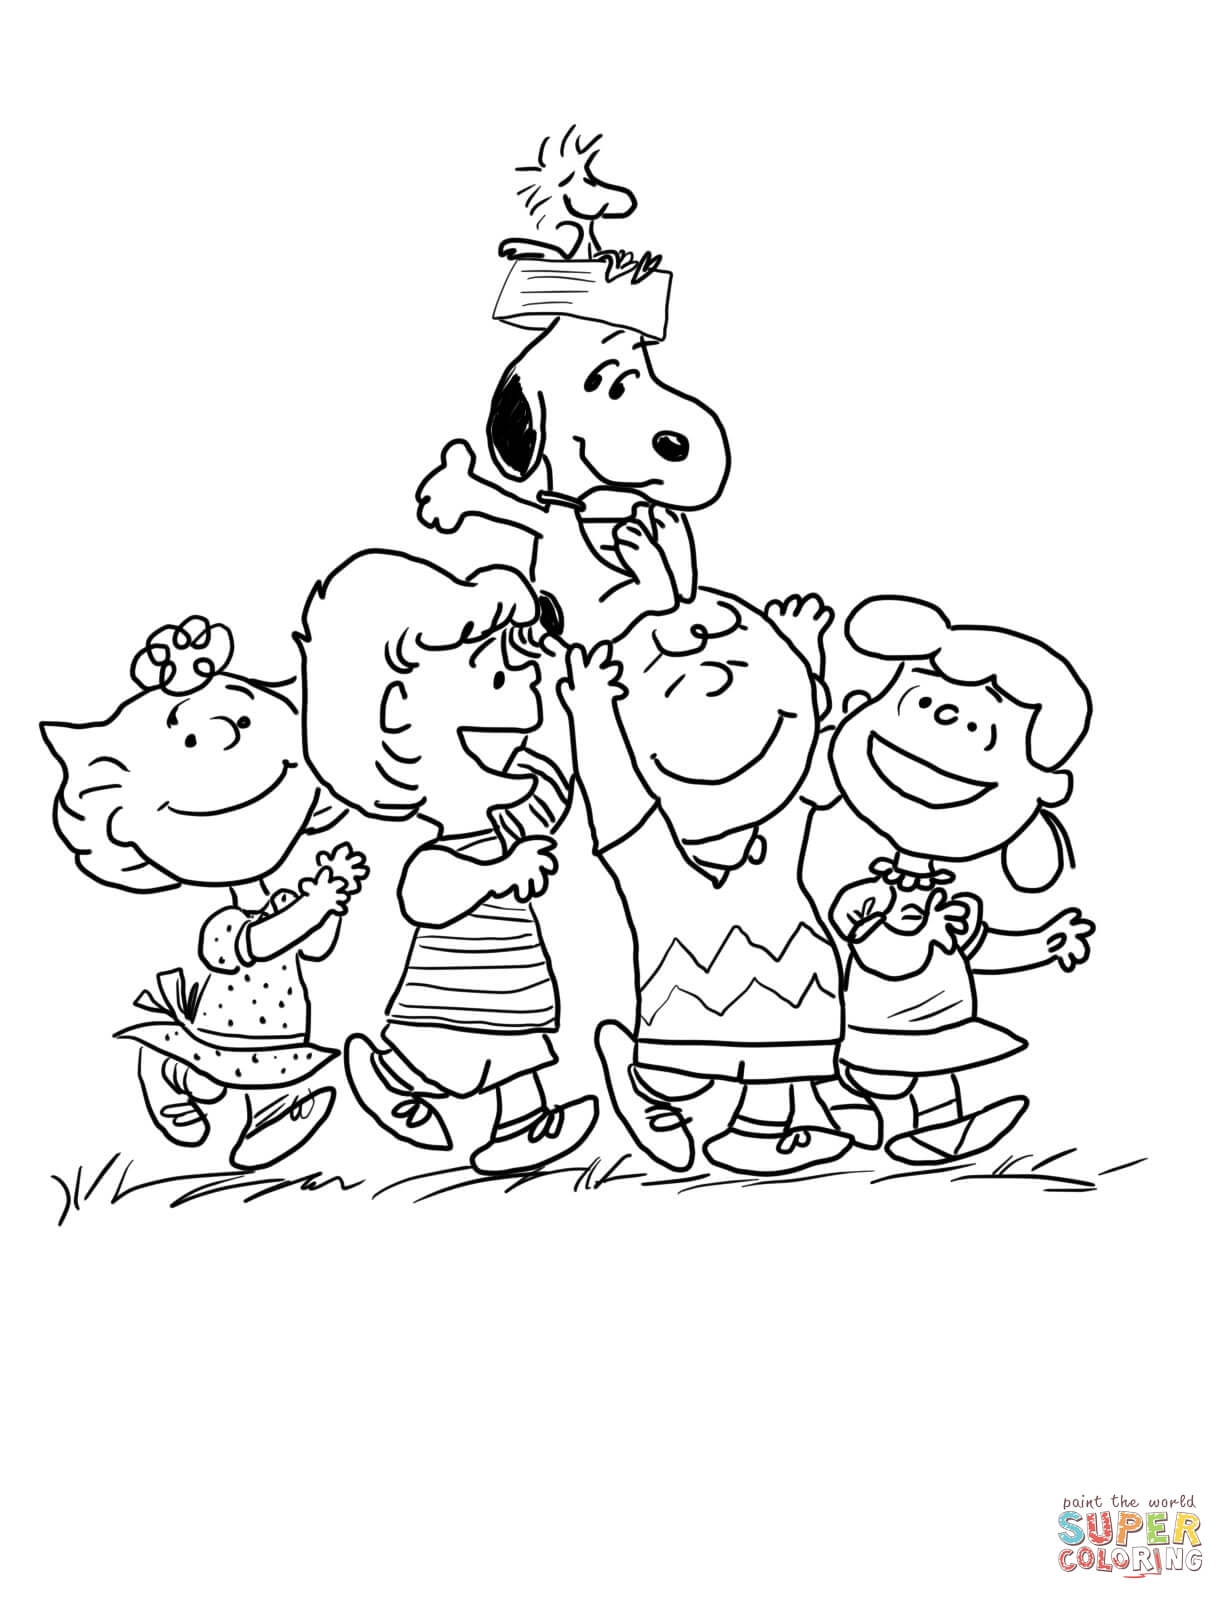 Snoopy And Woodstock Coloring Pages Woodstock Coloring Pages At Getdrawings Free For Personal Use